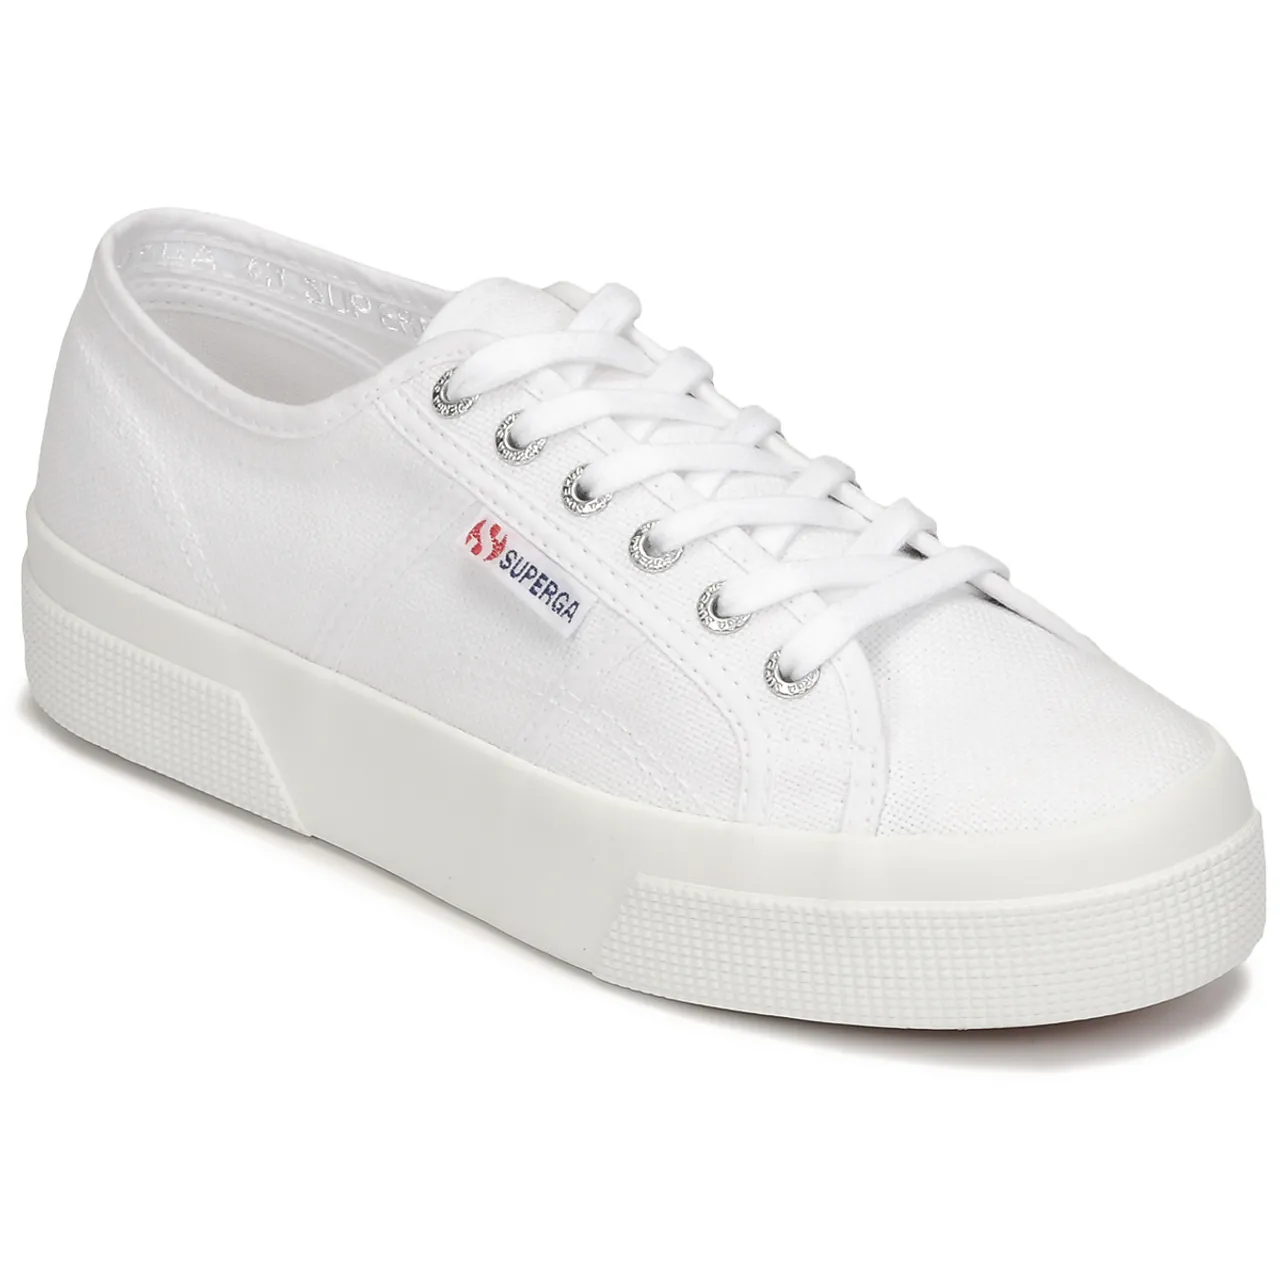 Superga  2740 COTON PLATFORM  women's Shoes (Trainers) in White